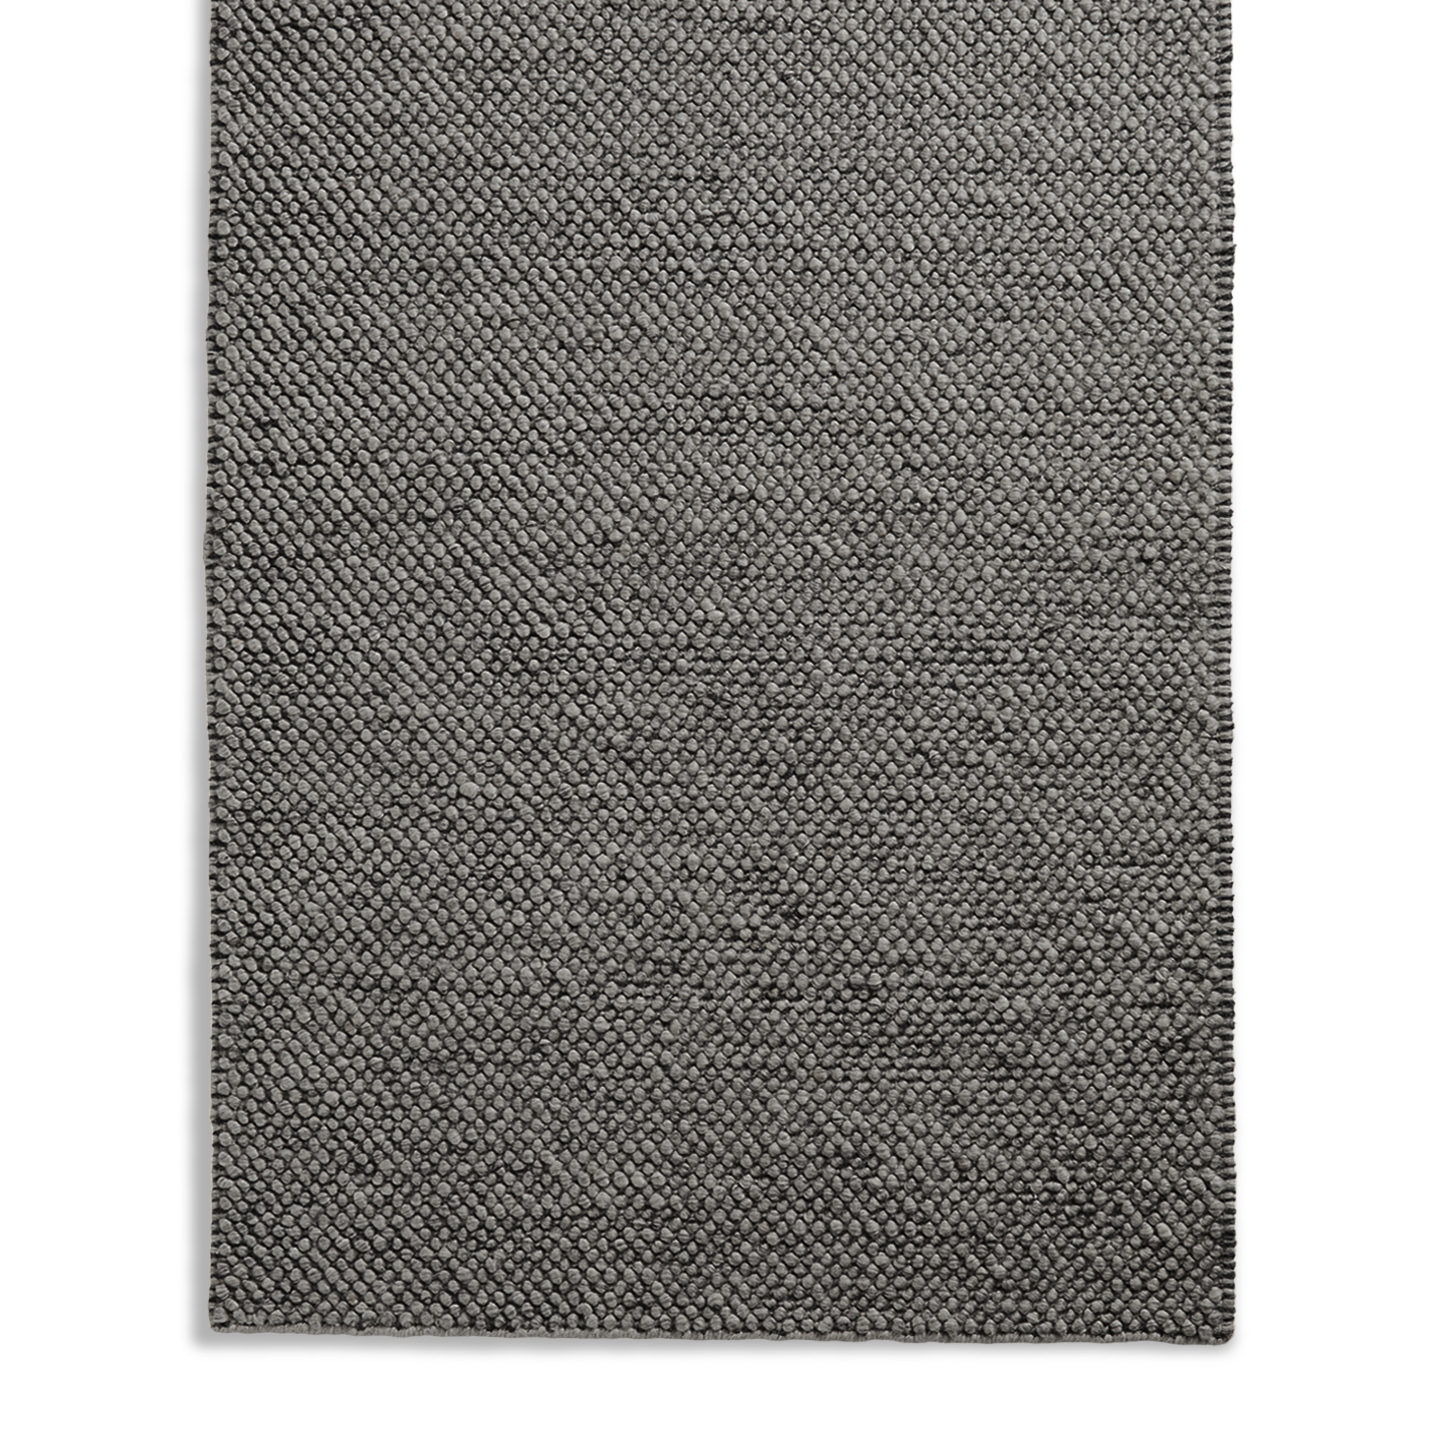 tact rug 200 x 300 cm anthracite grey by woud at adorn.house